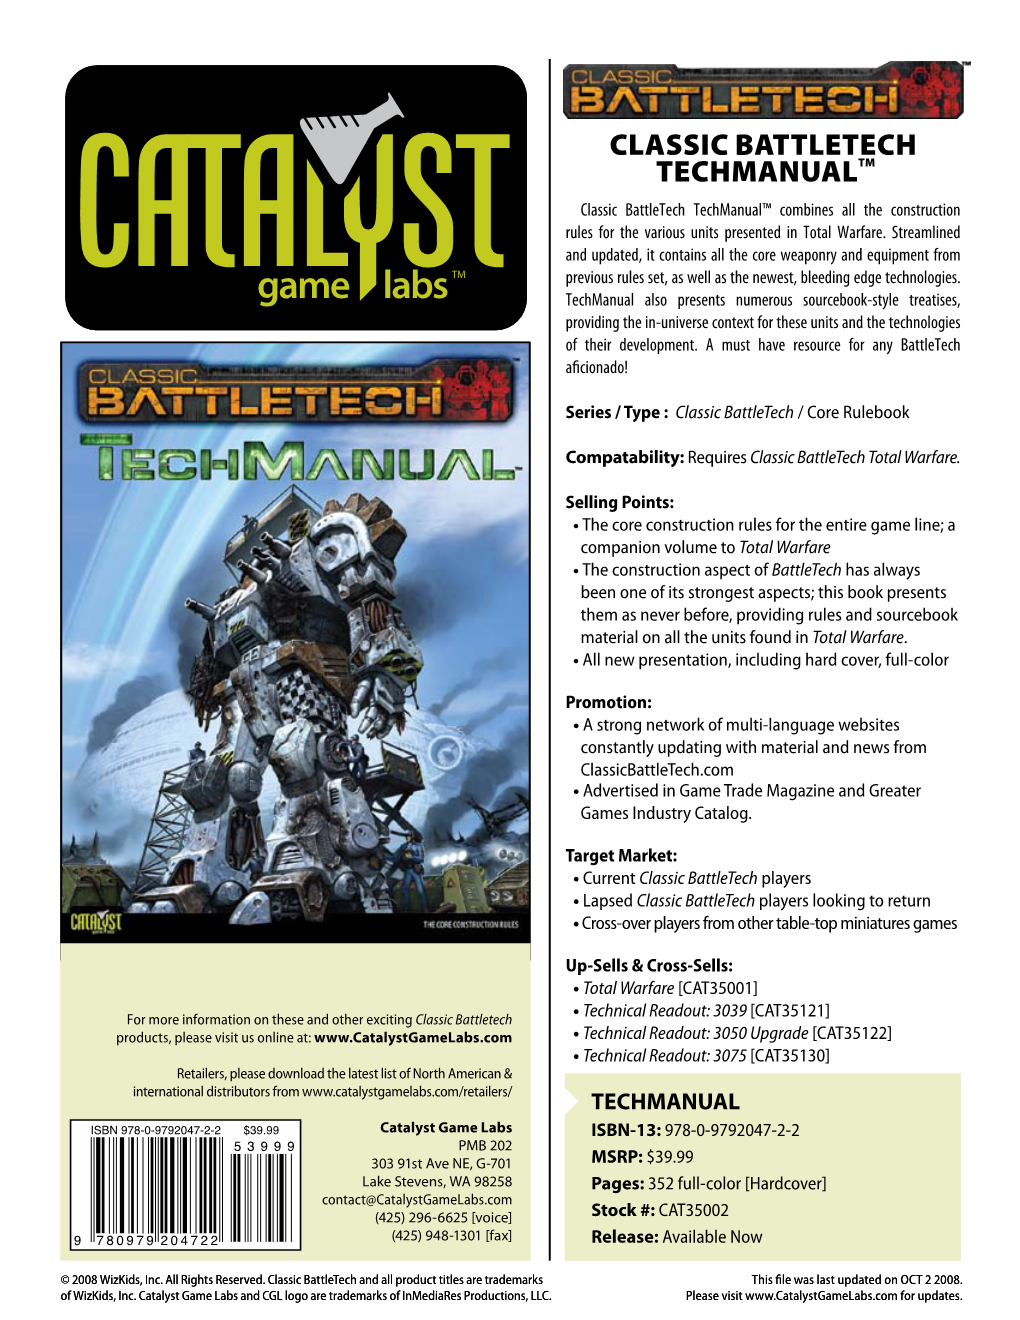 Classic Battletech TECHMANUALTM Classic Battletech Techmanual™ Combines All the Construction Rules for the Various Units Presented in Total Warfare